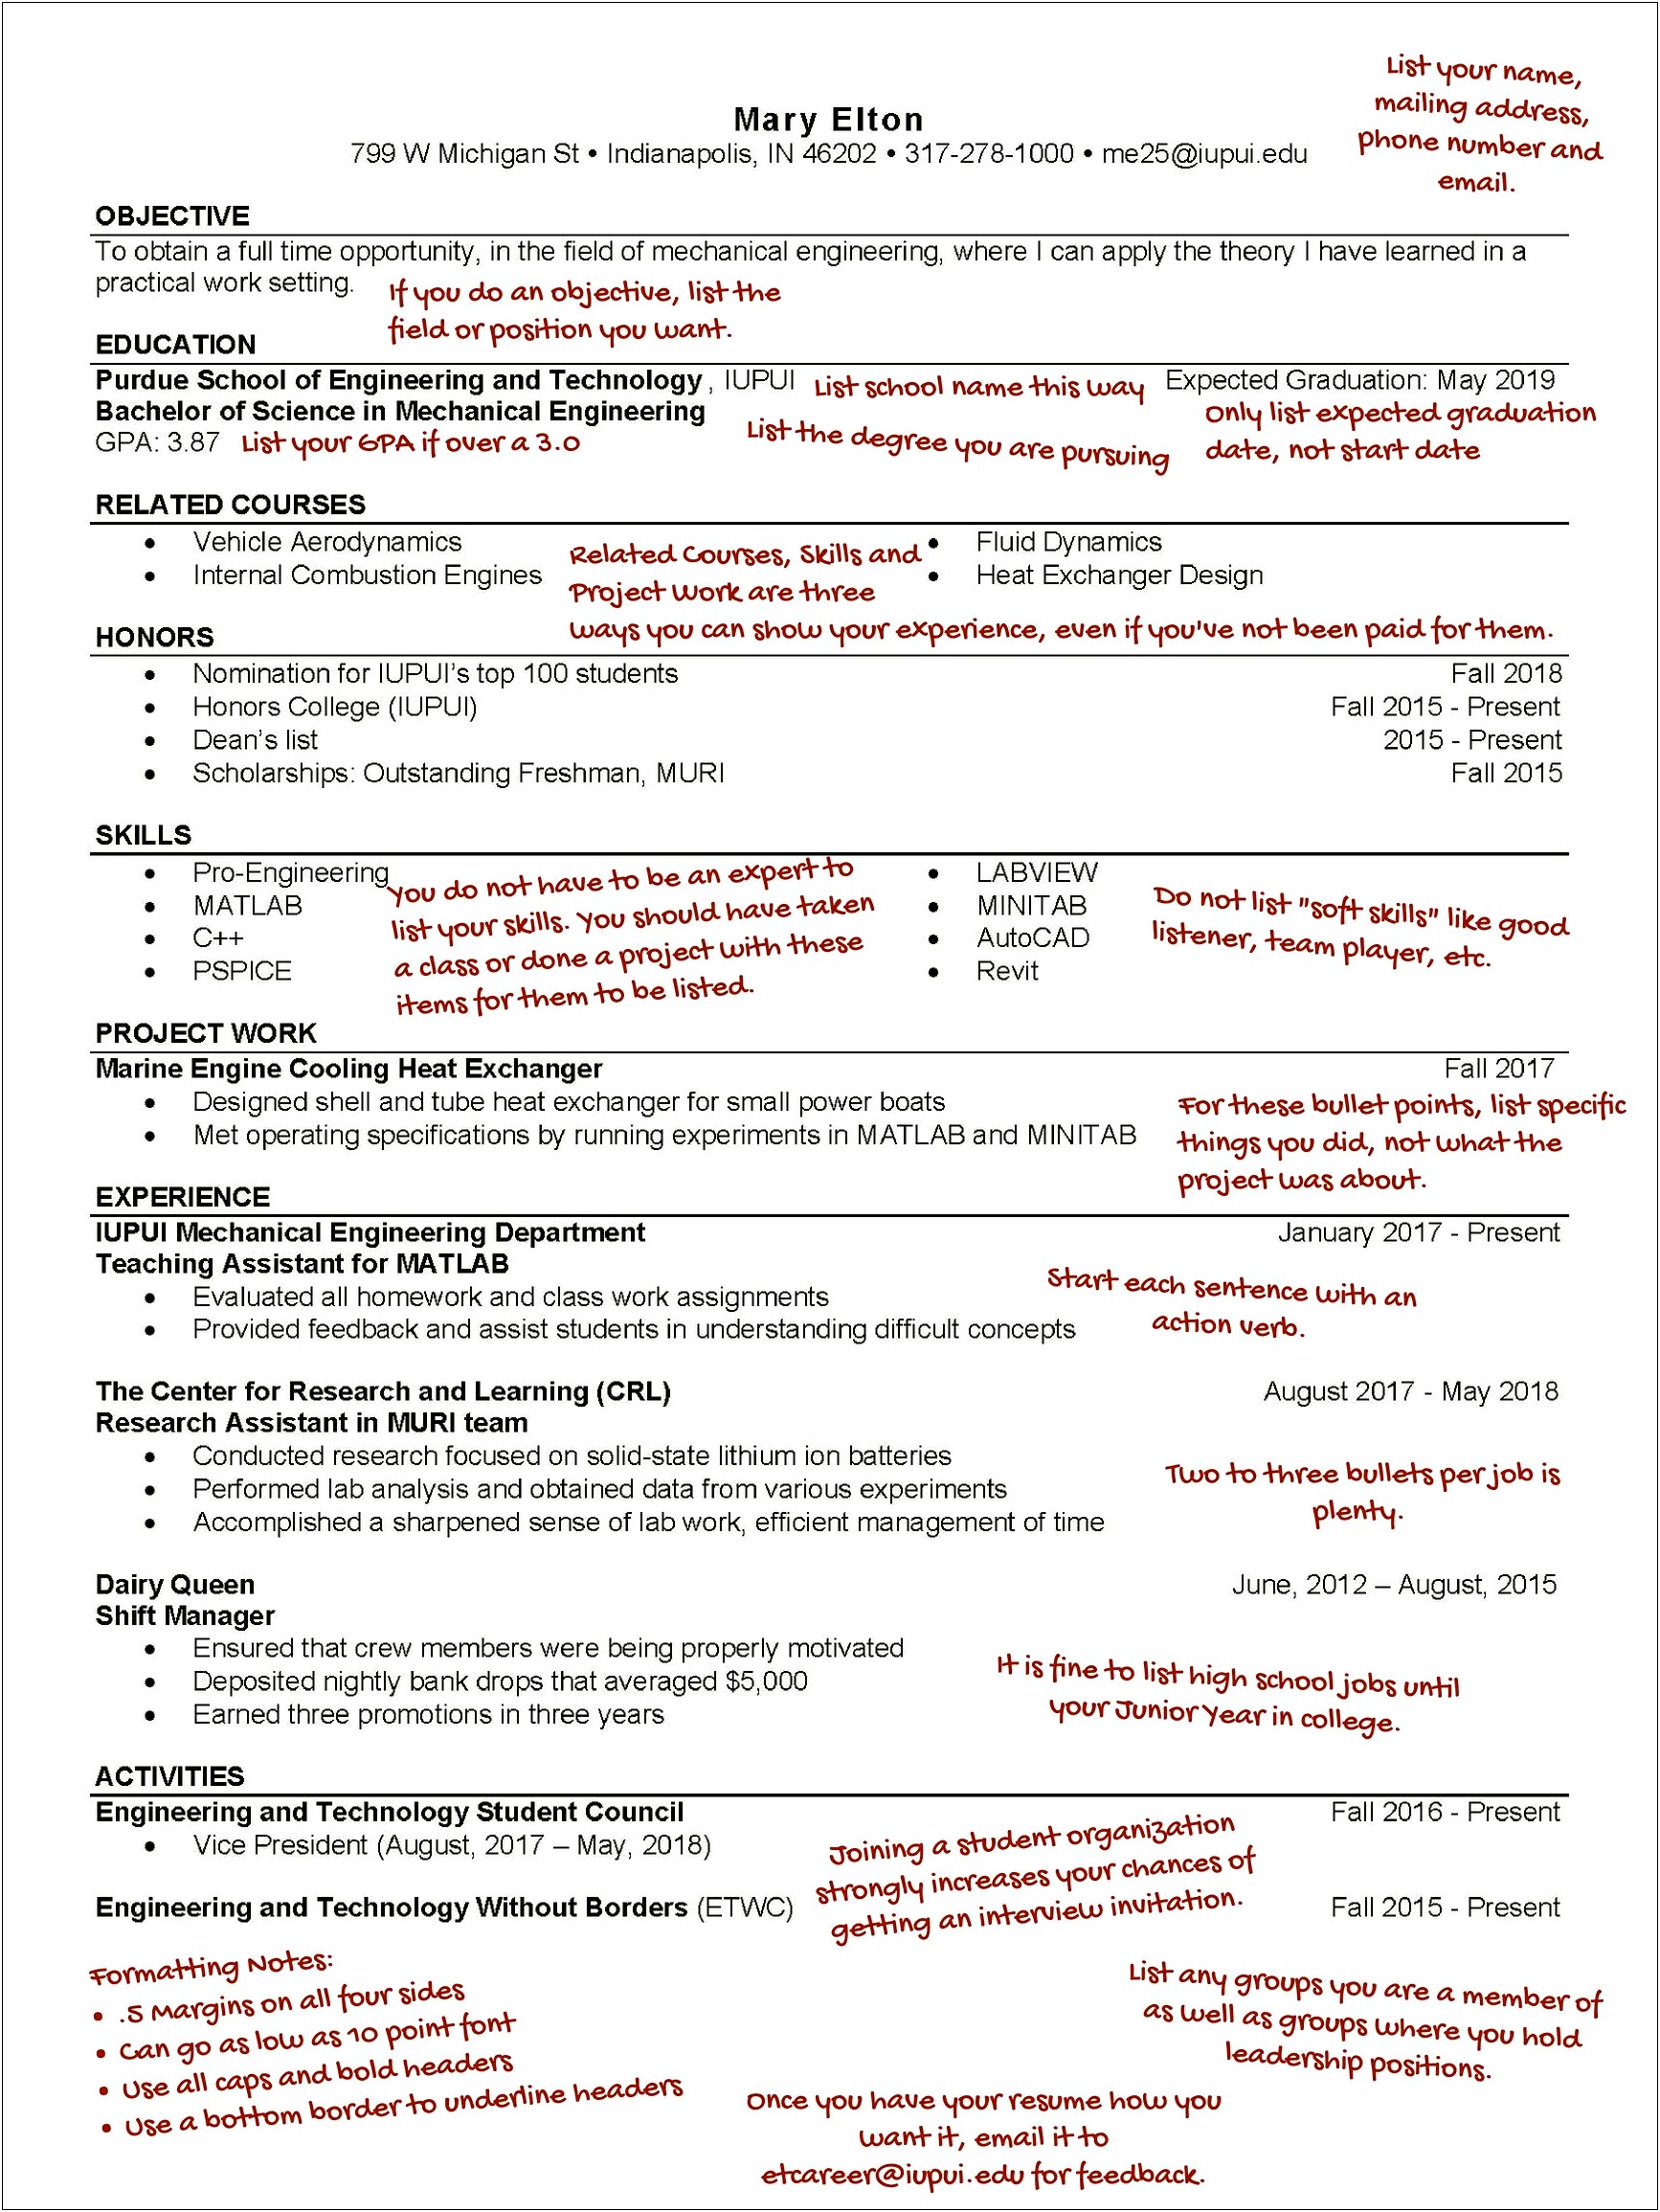 Conduct Market Research Indiana University Sample Resume